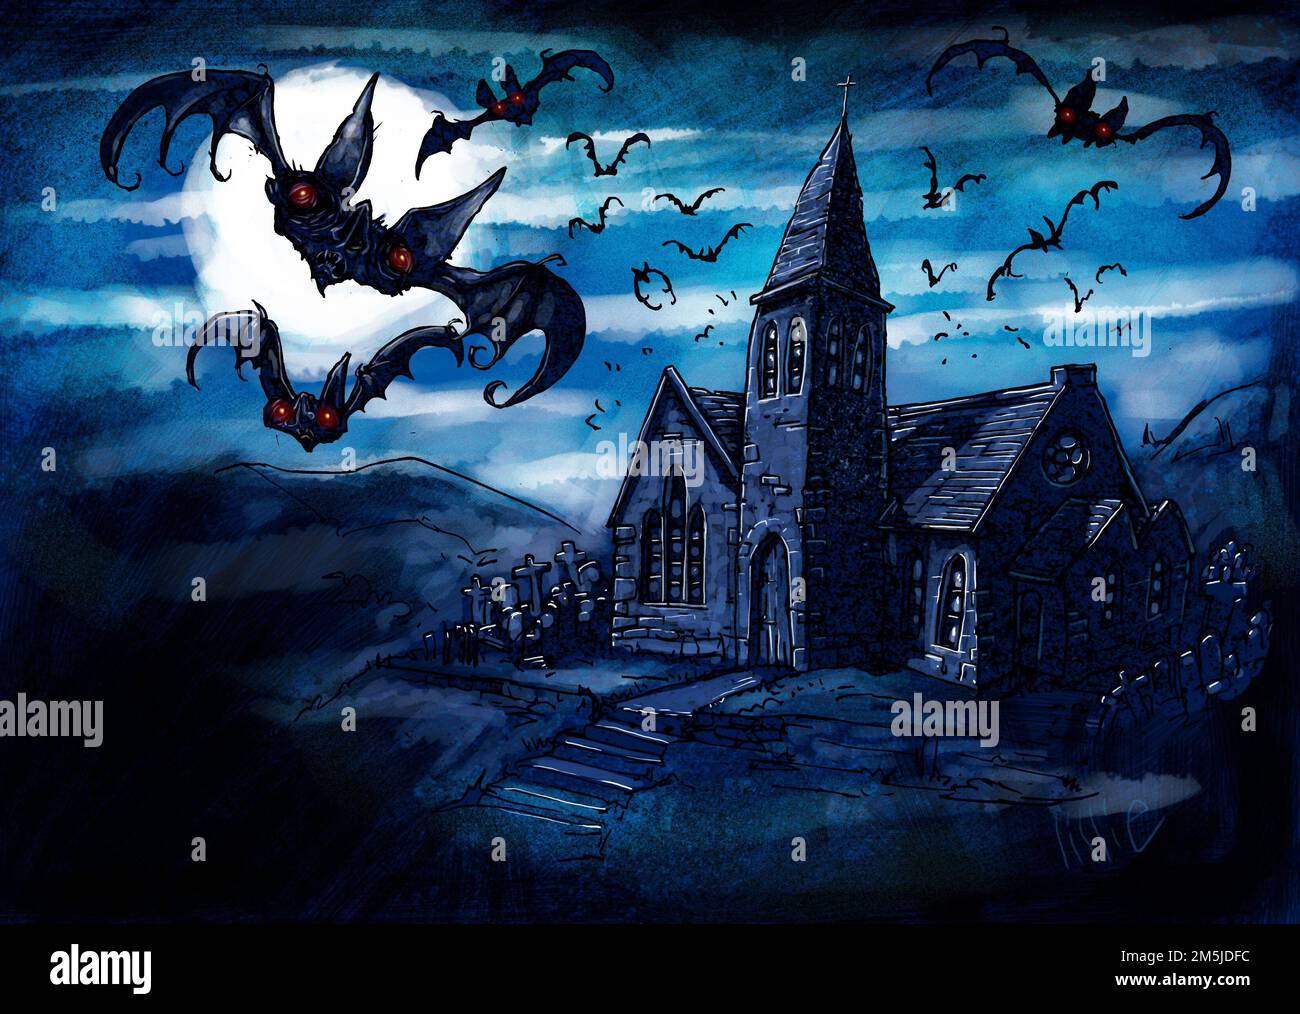 Art illustration of bats flying over a spooky, creepy, abandoned house during full moon, would suit horror, gothic book illustration, editorial art. Stock Photo